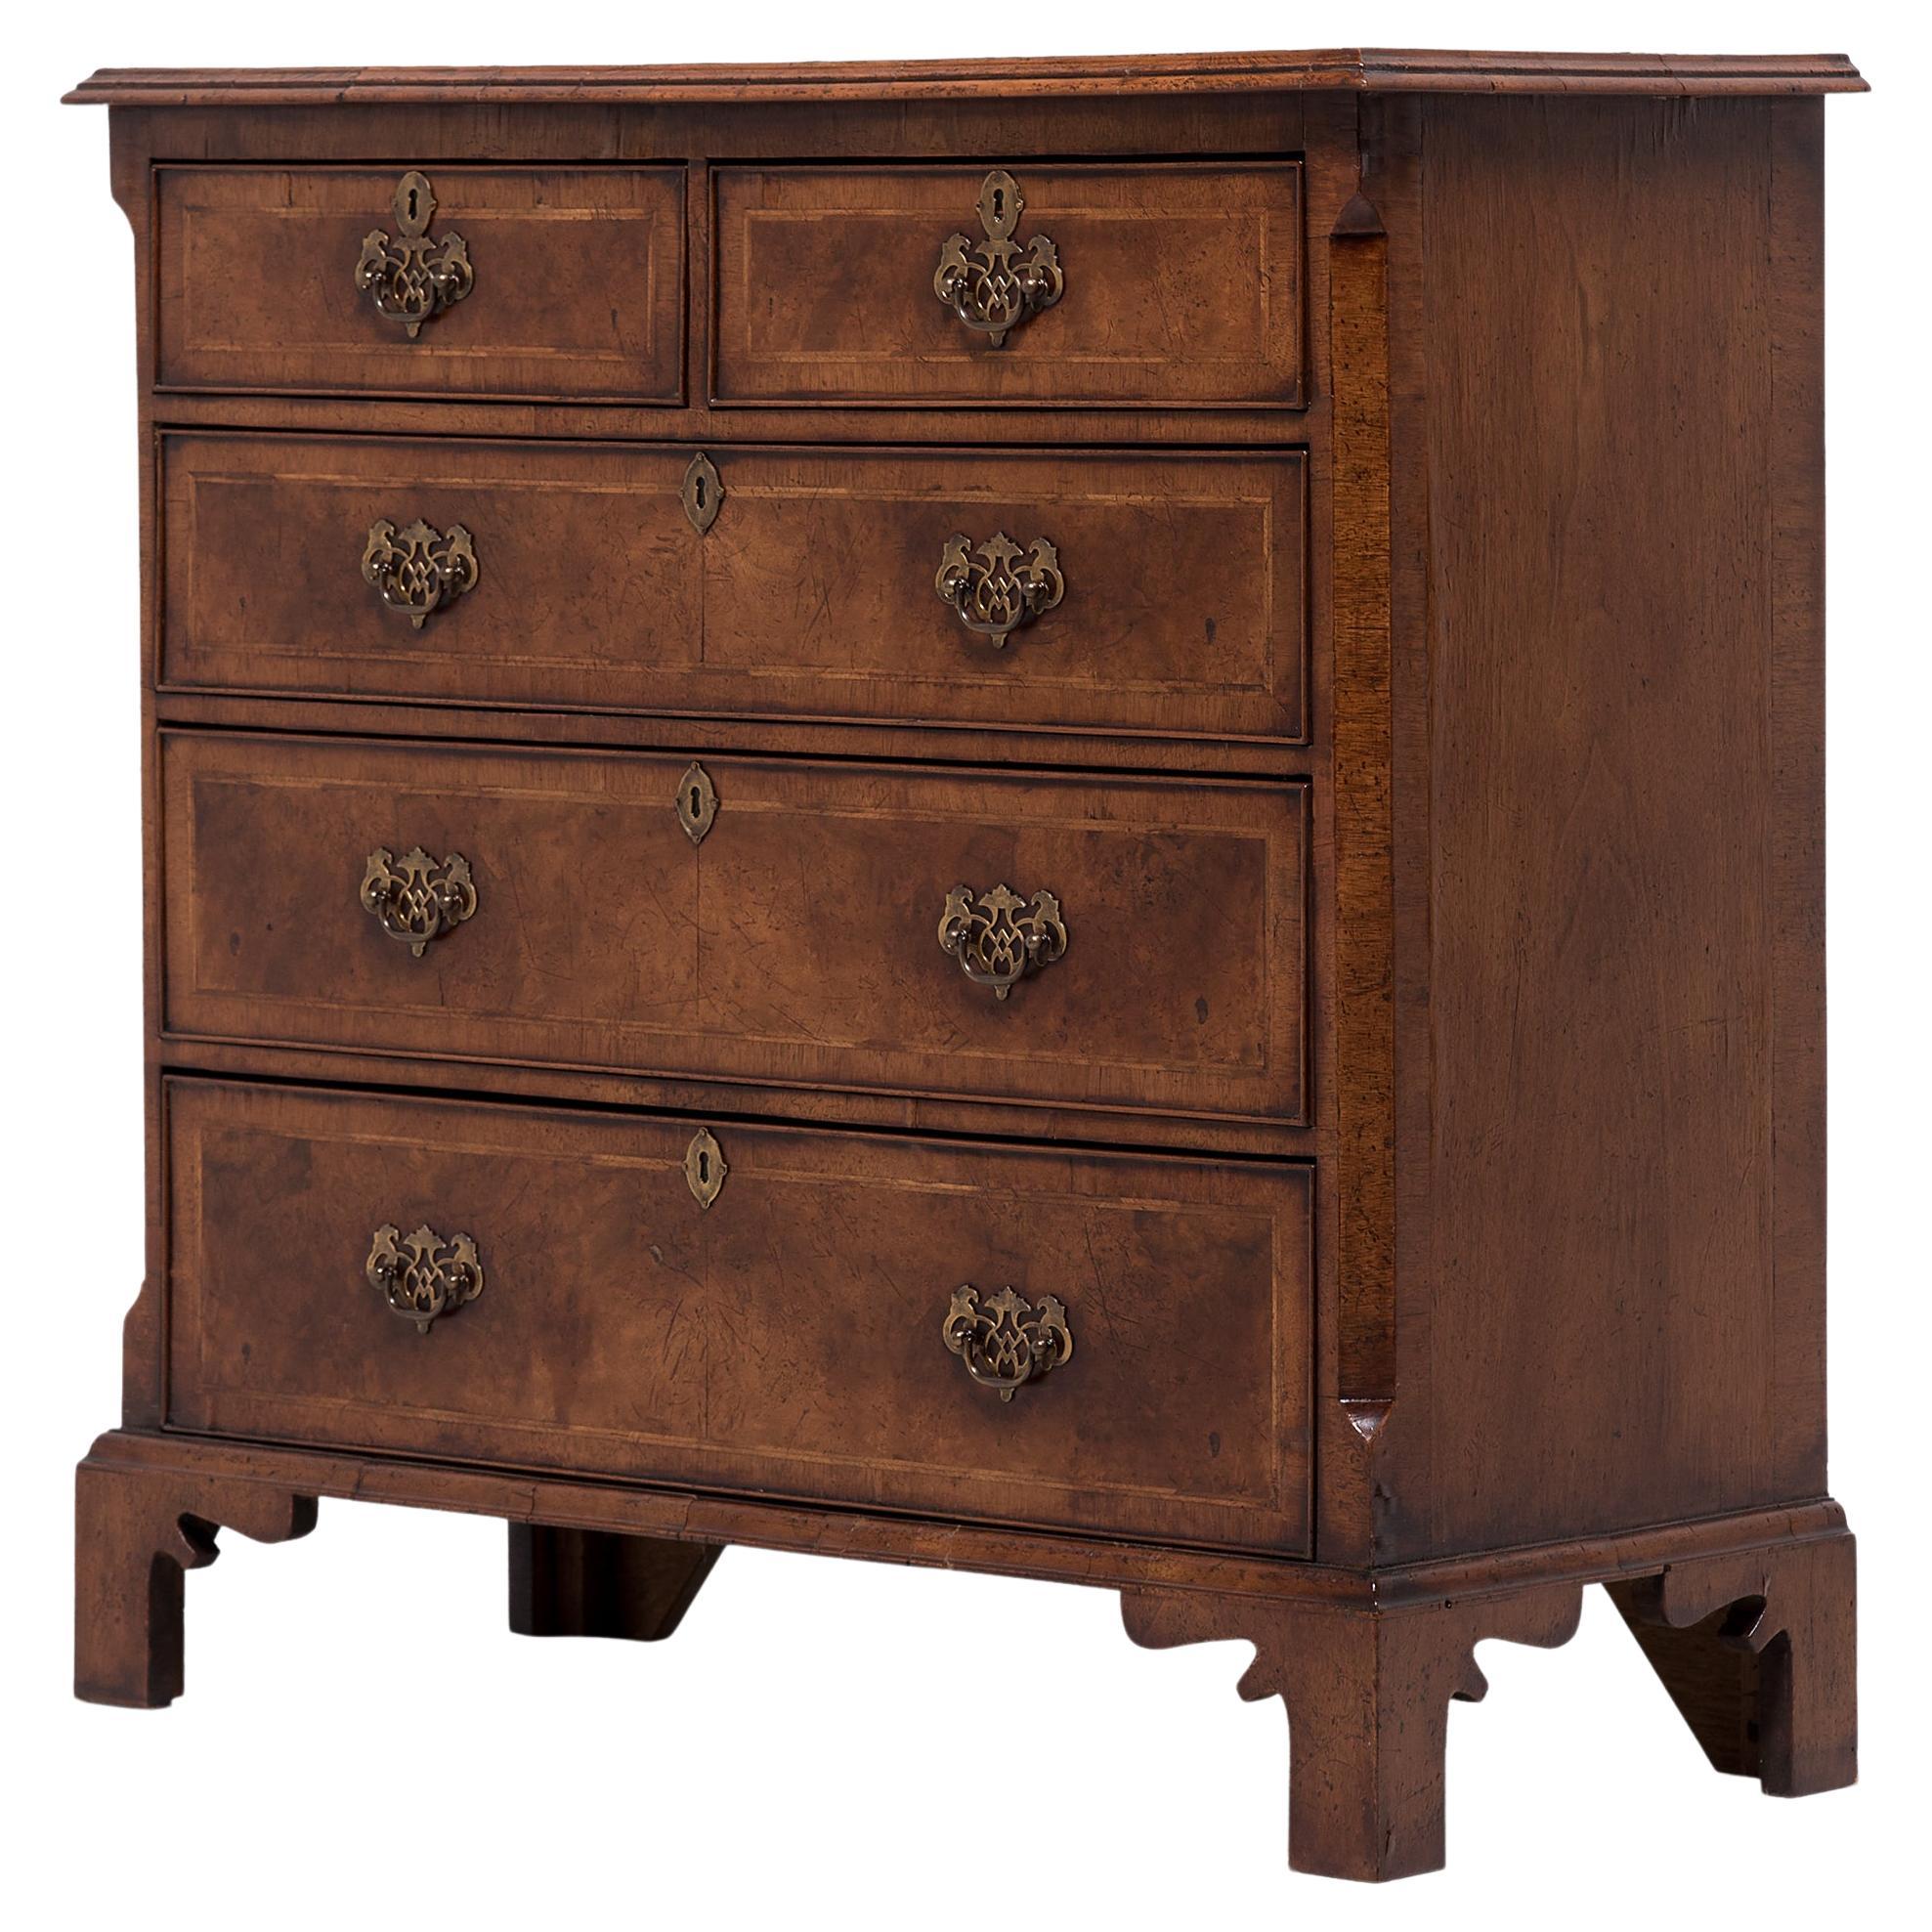 Queen Anne Style Burled Walnut Chest of Drawers, c. 1800